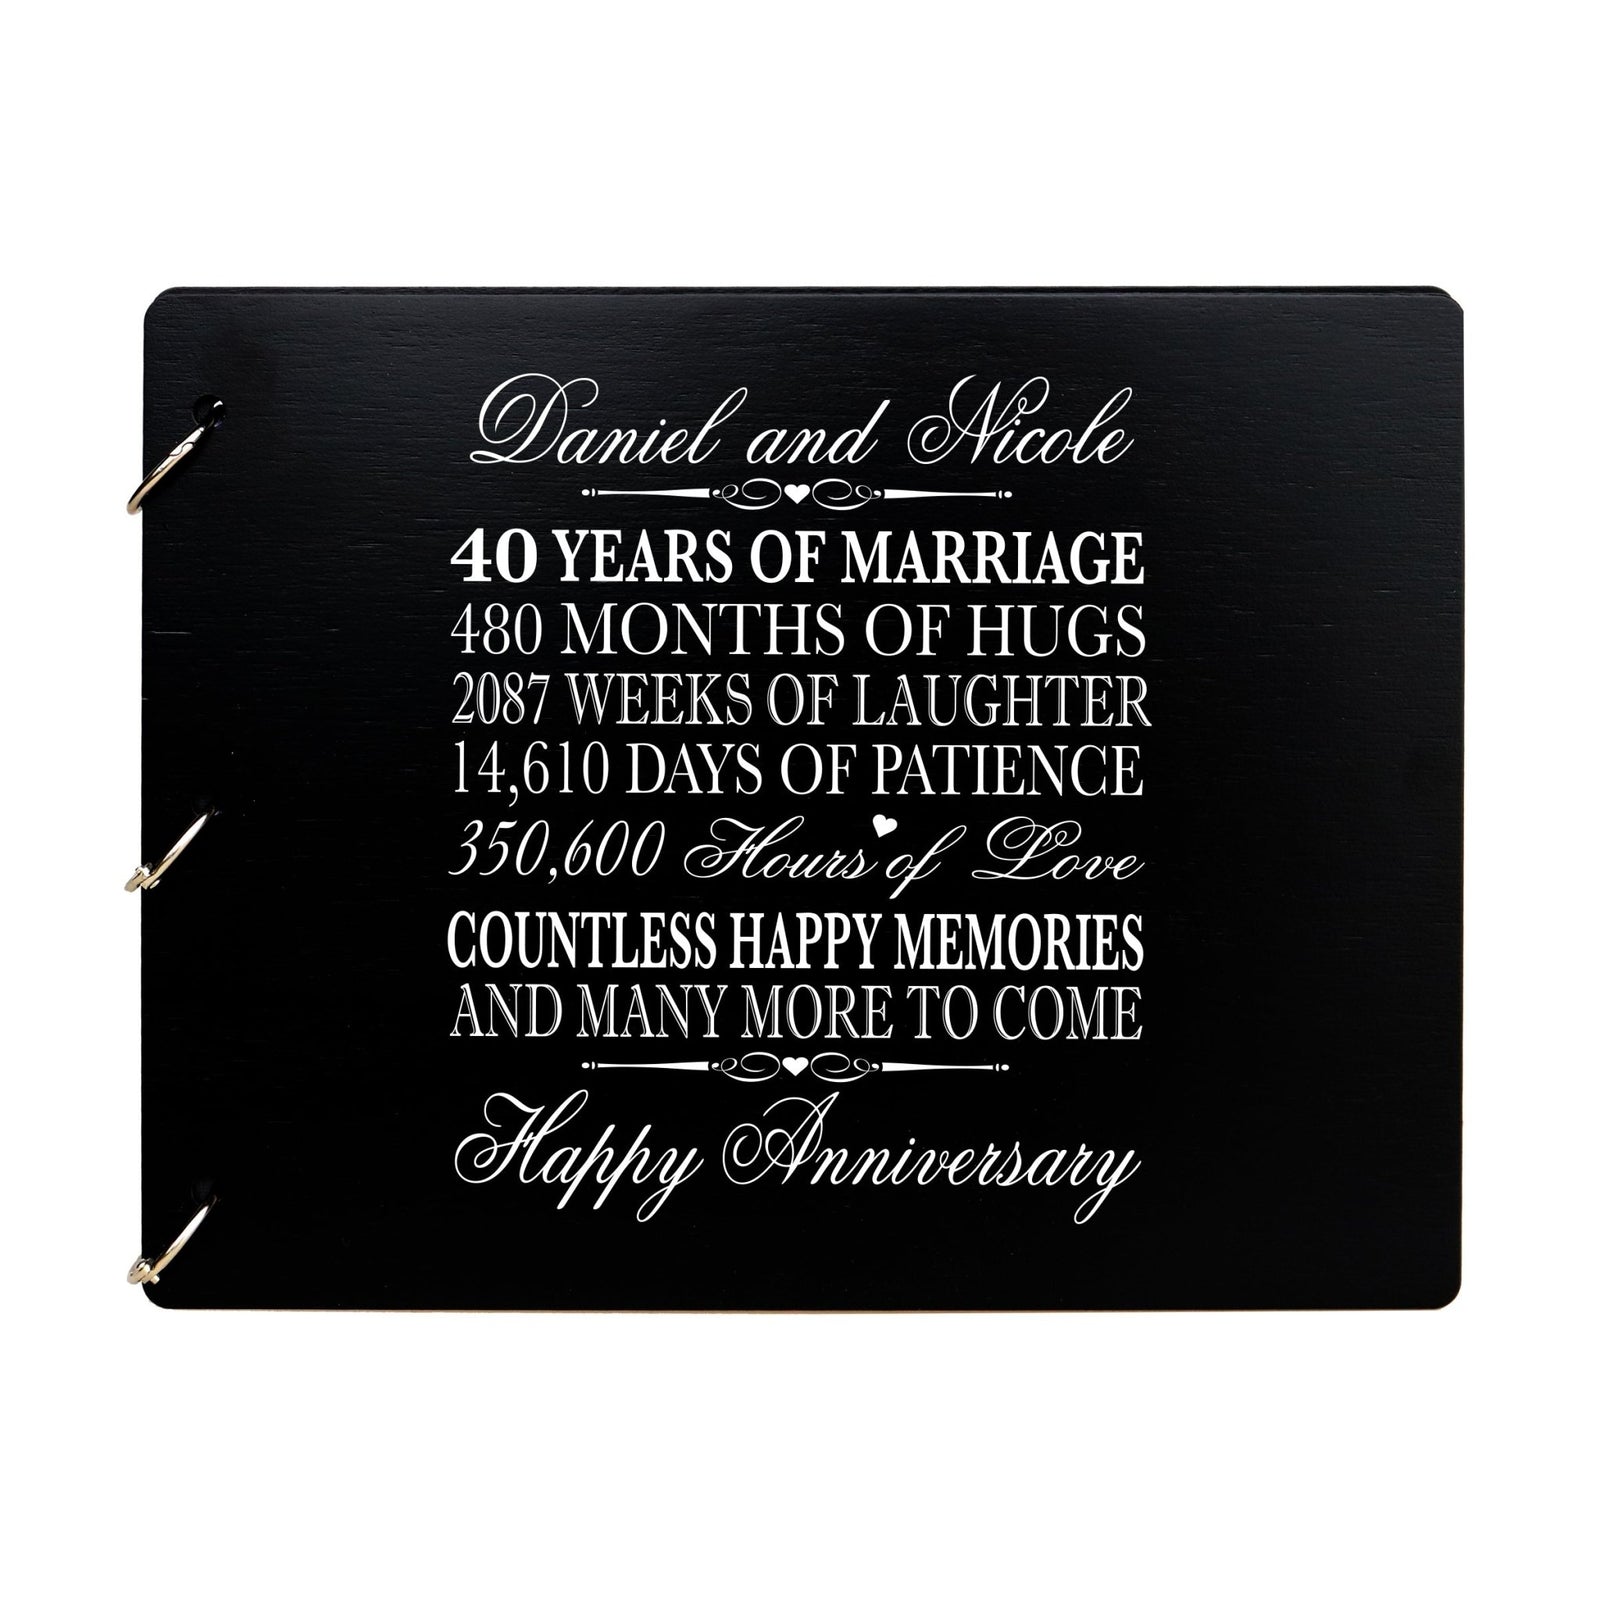 Personalized Guest Book Sign for 40th Wedding Anniversary - Happy Memories - LifeSong Milestones